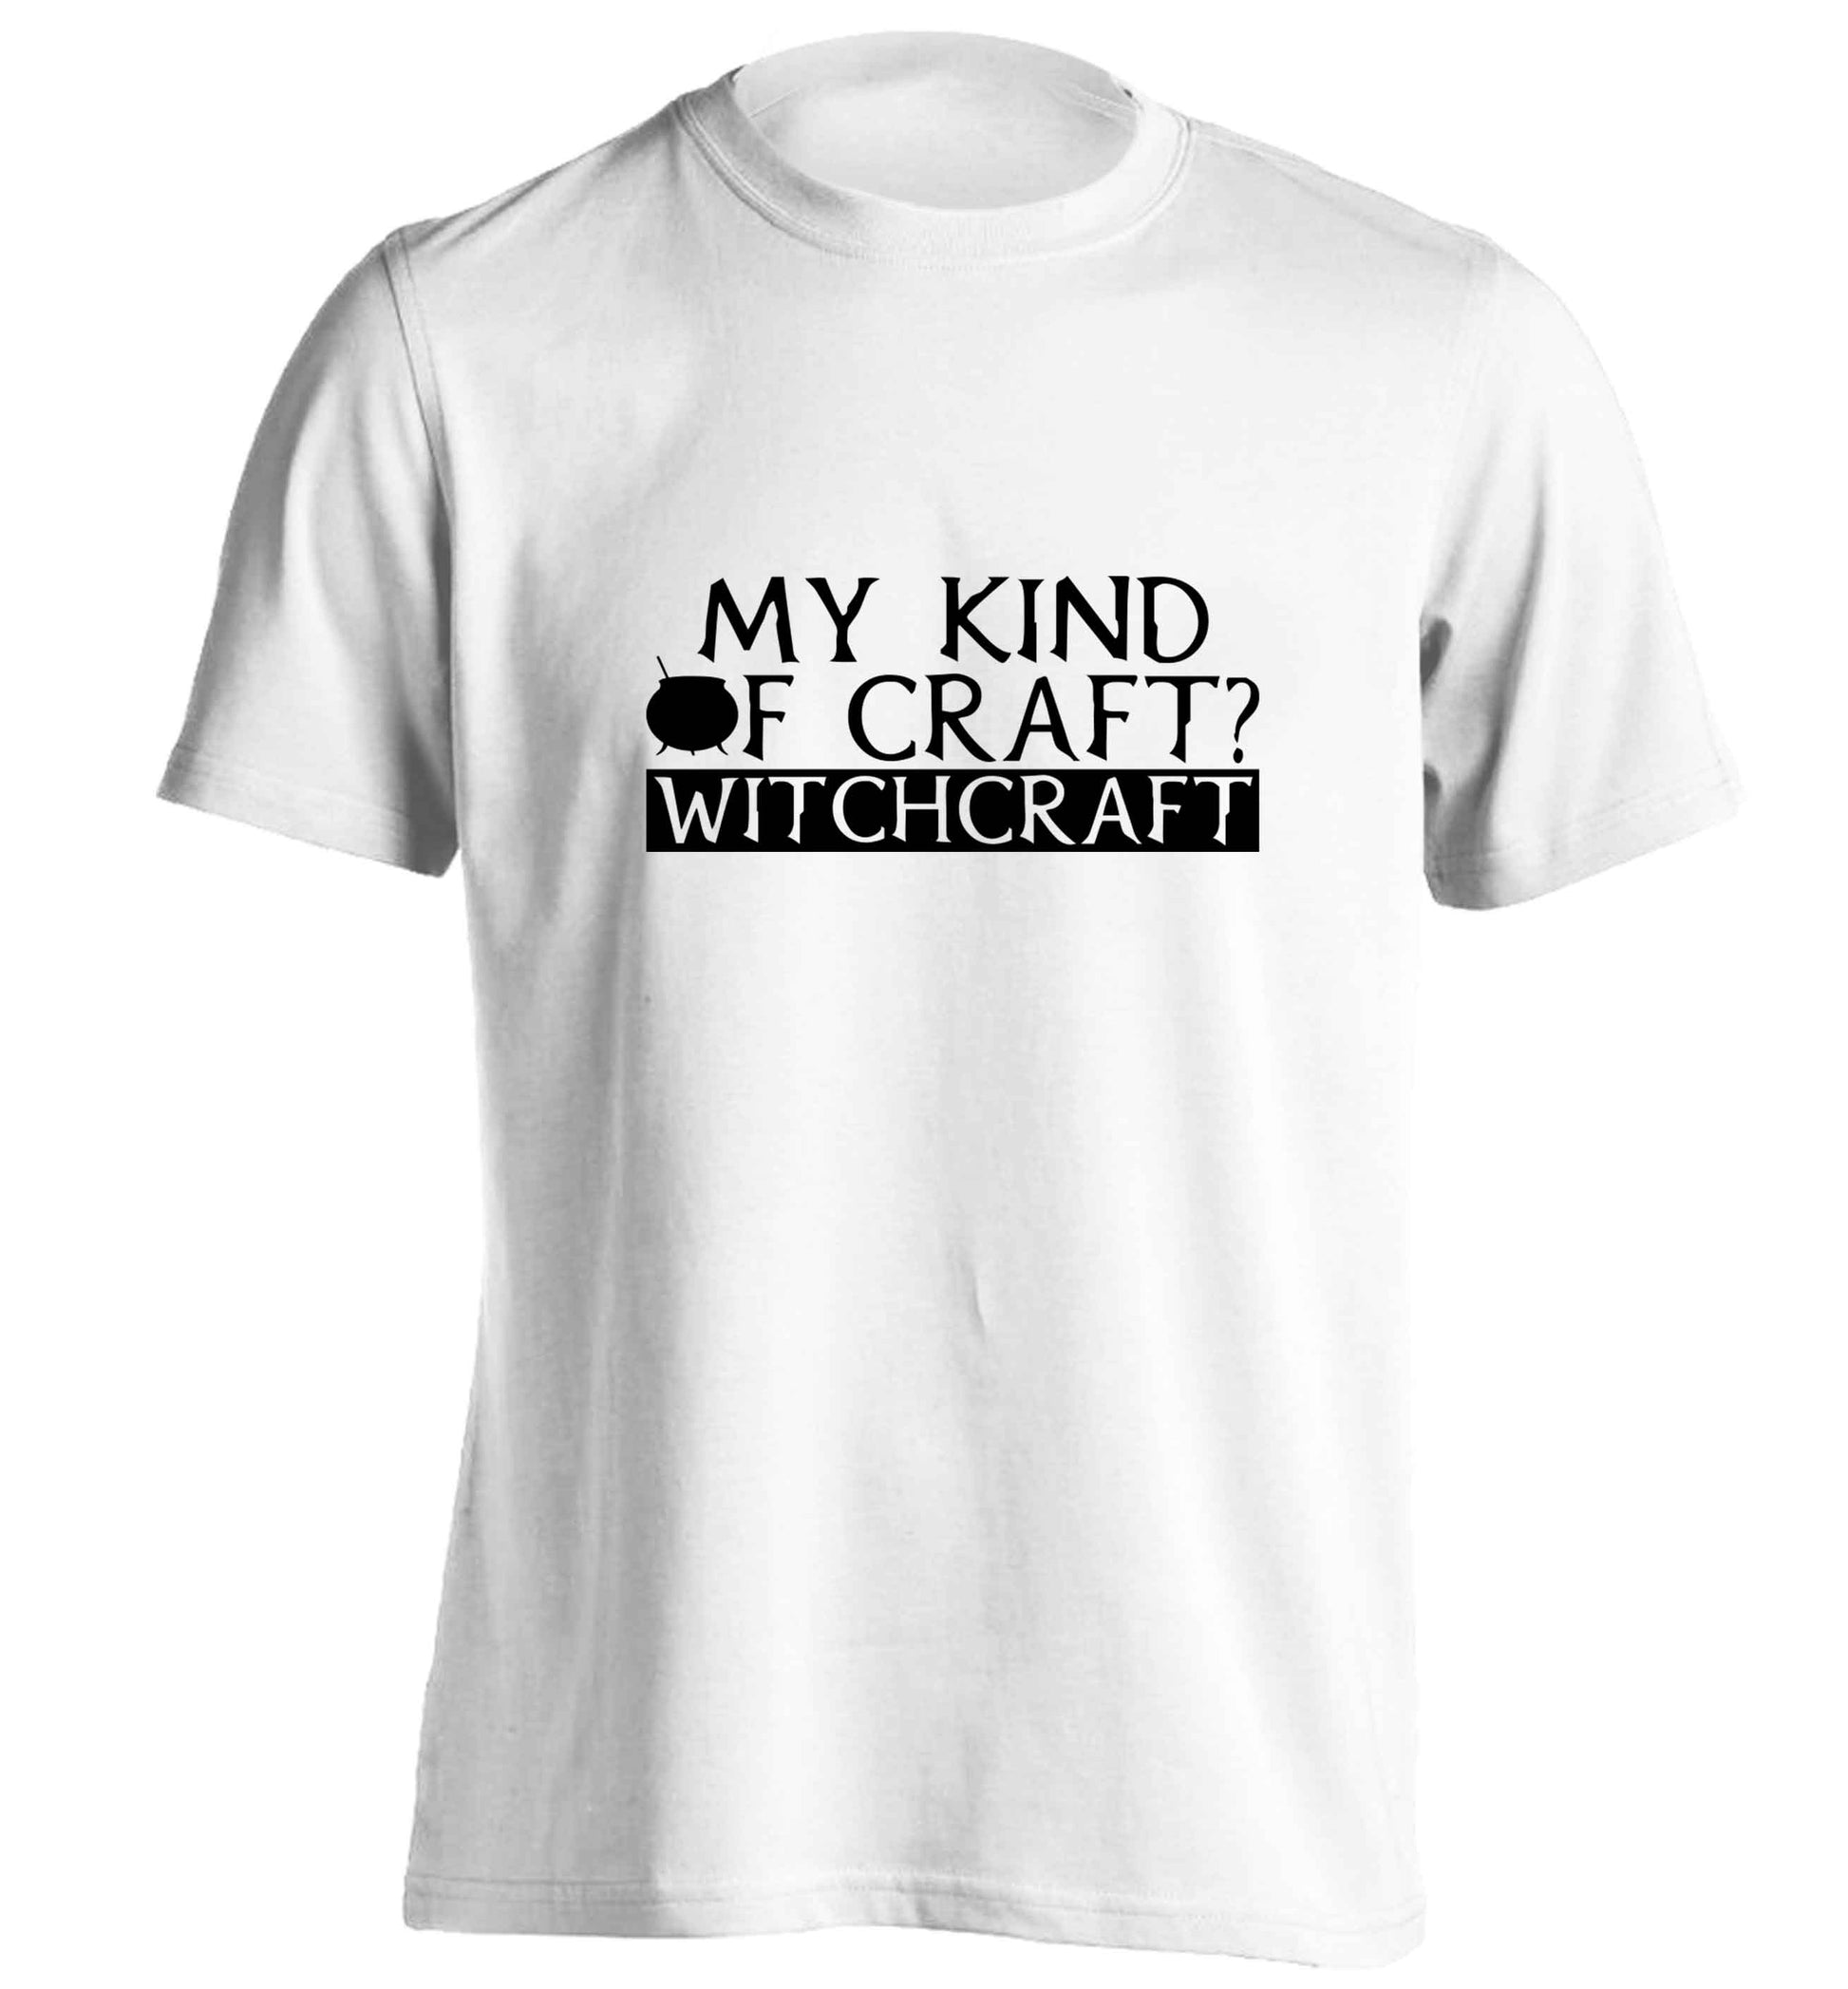 My king of craft? witchcraft  adults unisex white Tshirt 2XL